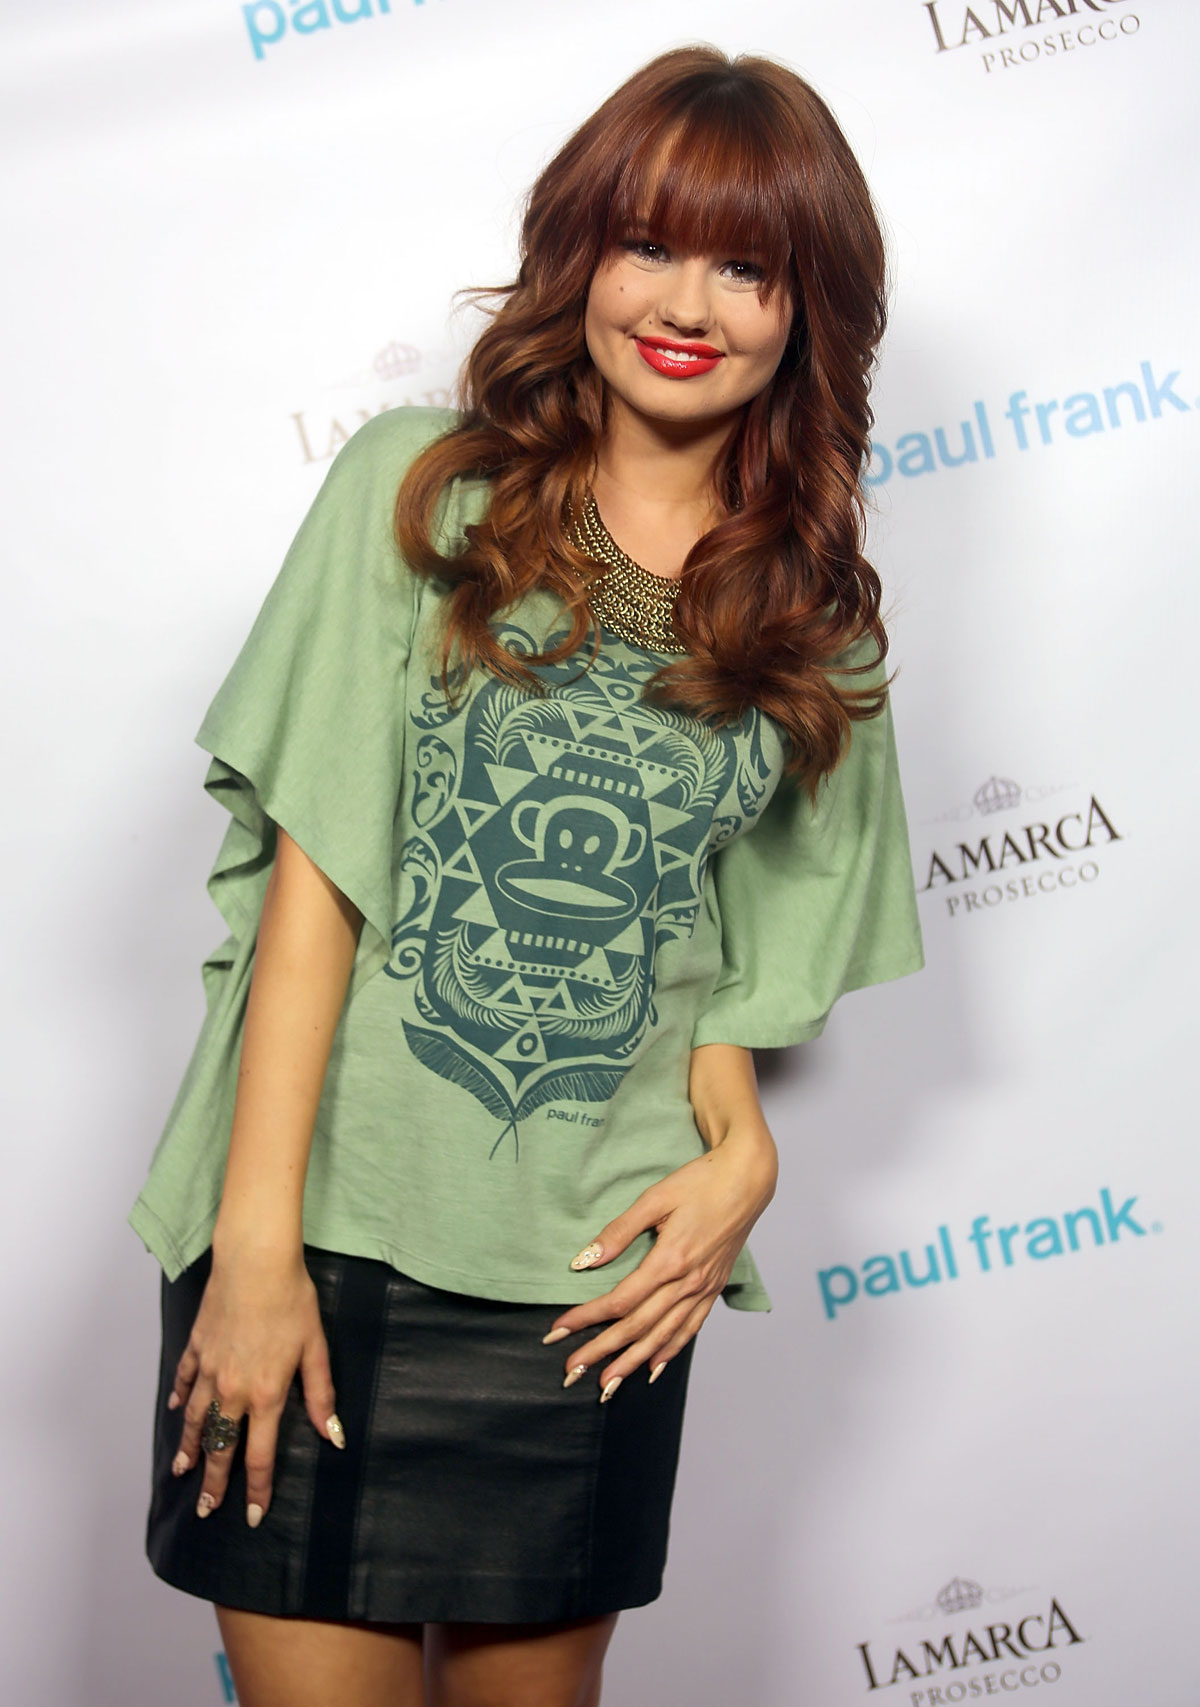 DEBBY RYAN at Paul Frank Fashion Night Out in West Hollywood.